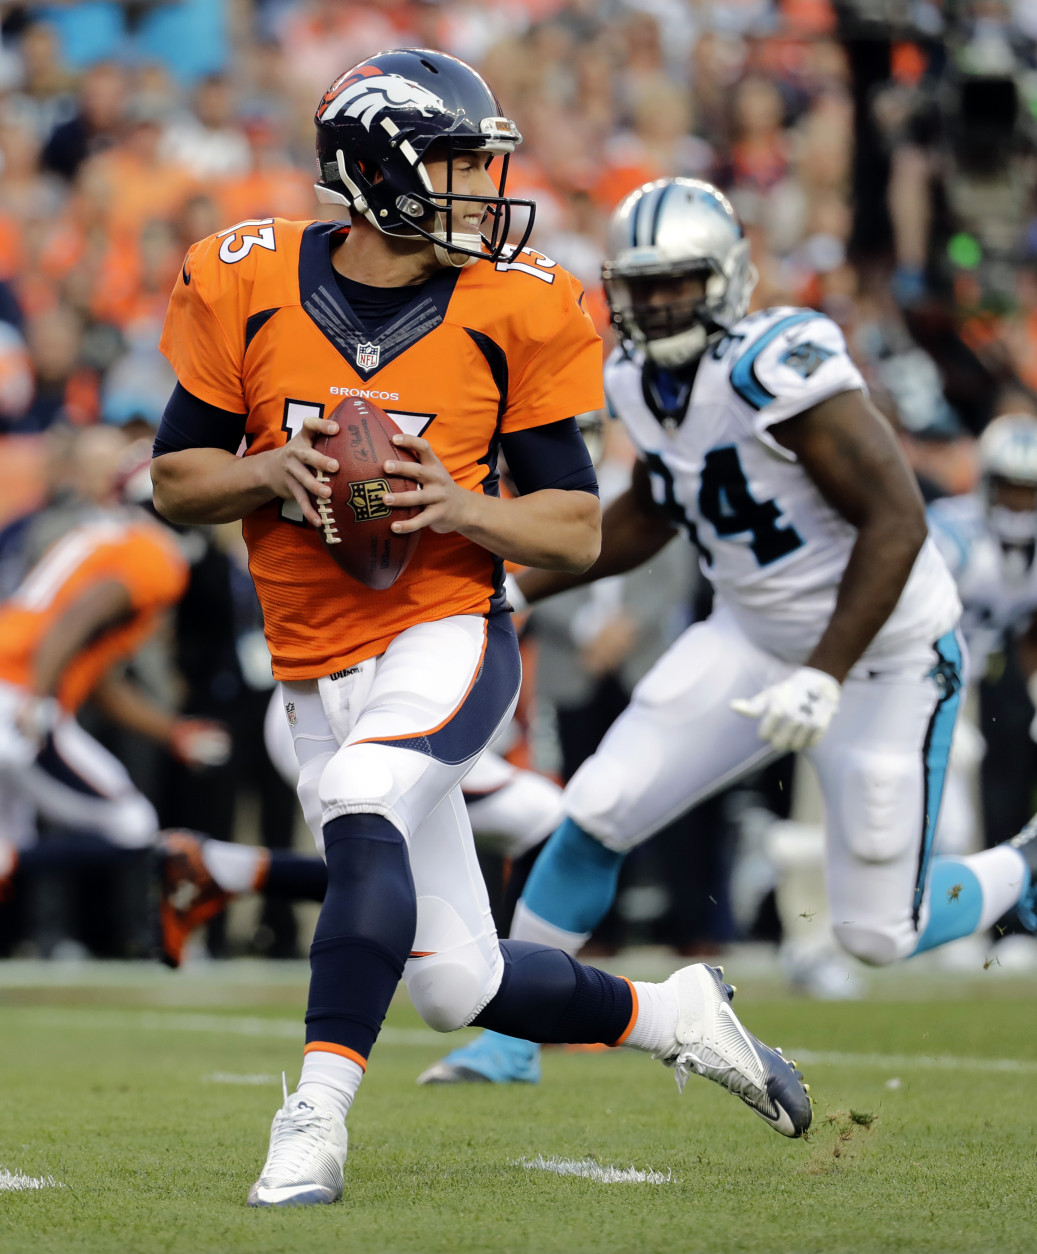 Denver Broncos quarterback Trevor Siemian (13) looks to pass as Carolina Panthers defensive end Kony Ealy (94) pursues during the first half of an NFL football game, Thursday, Sept. 8, 2016, in Denver. (AP Photo/Jack Dempsey)